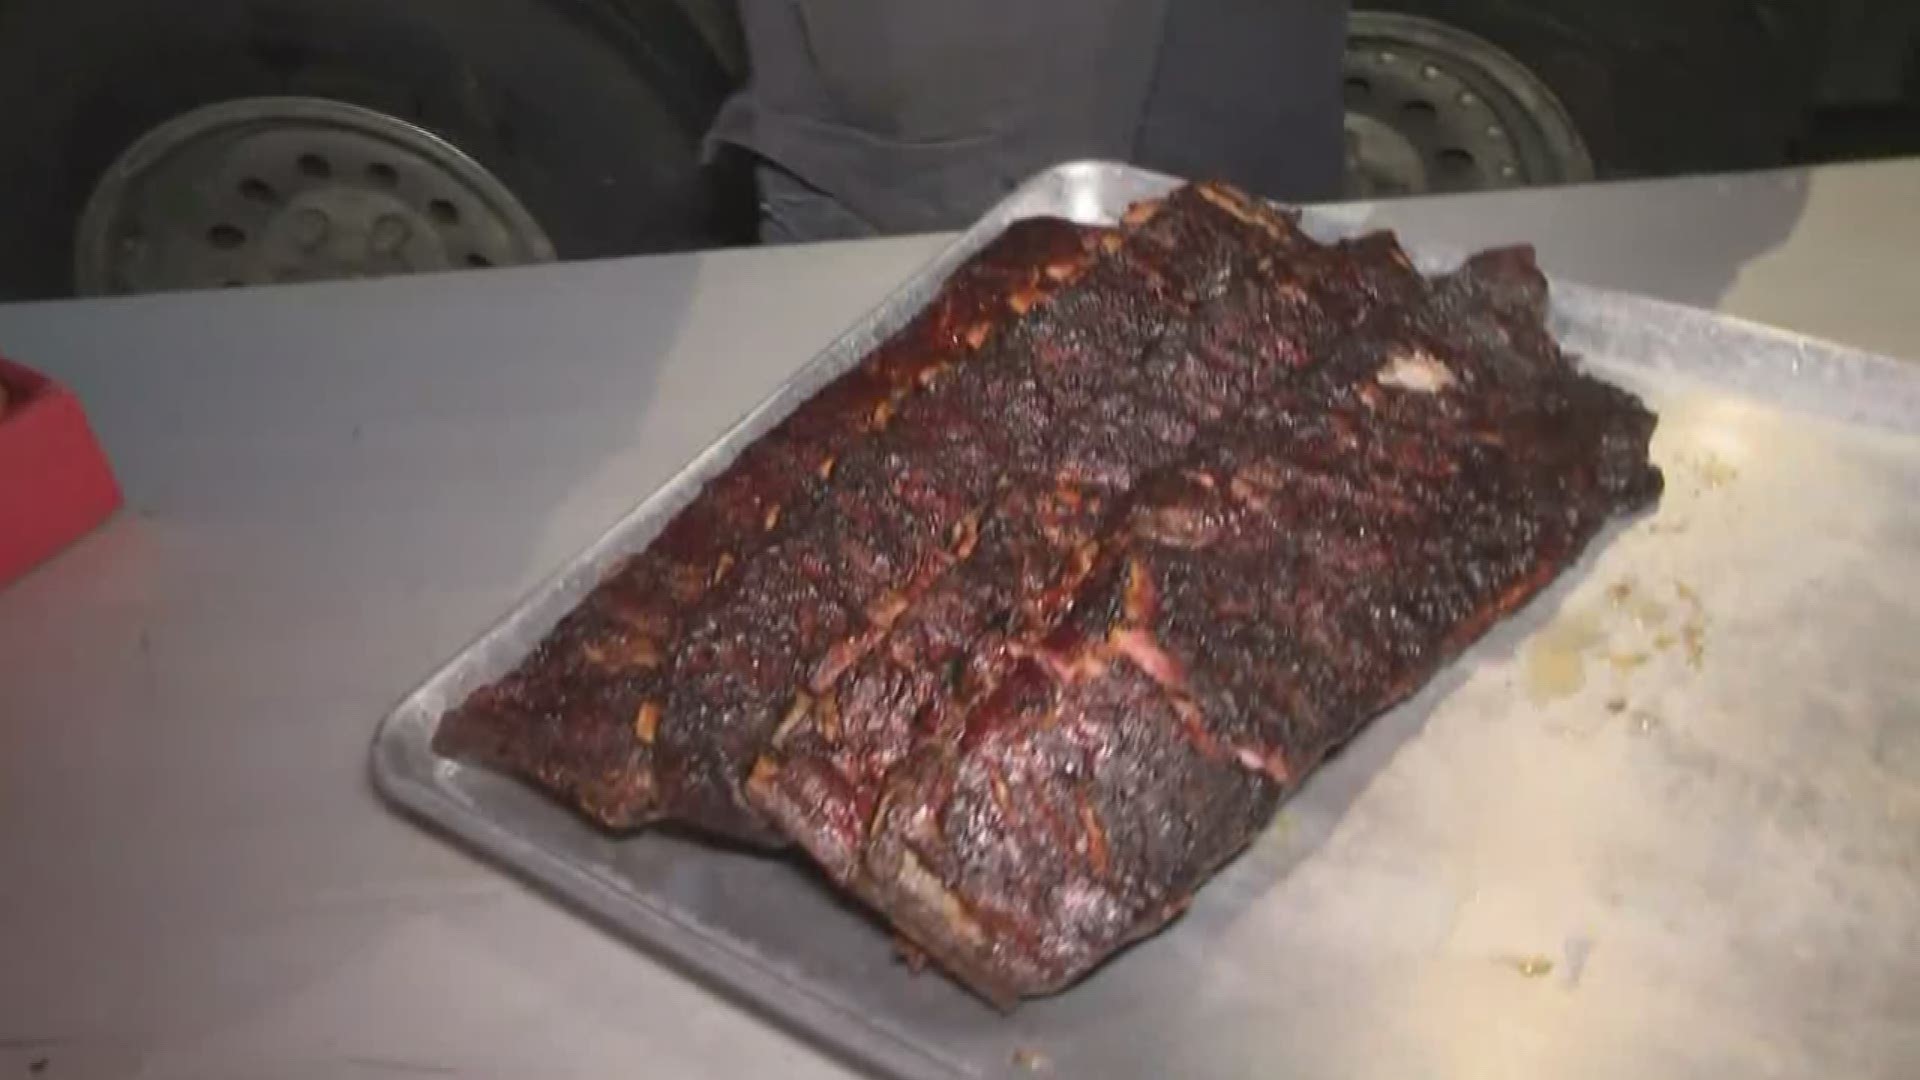 June 22, 2018: Mojo's Rib Shack shows us what it takes to cook a great rack of ribs.